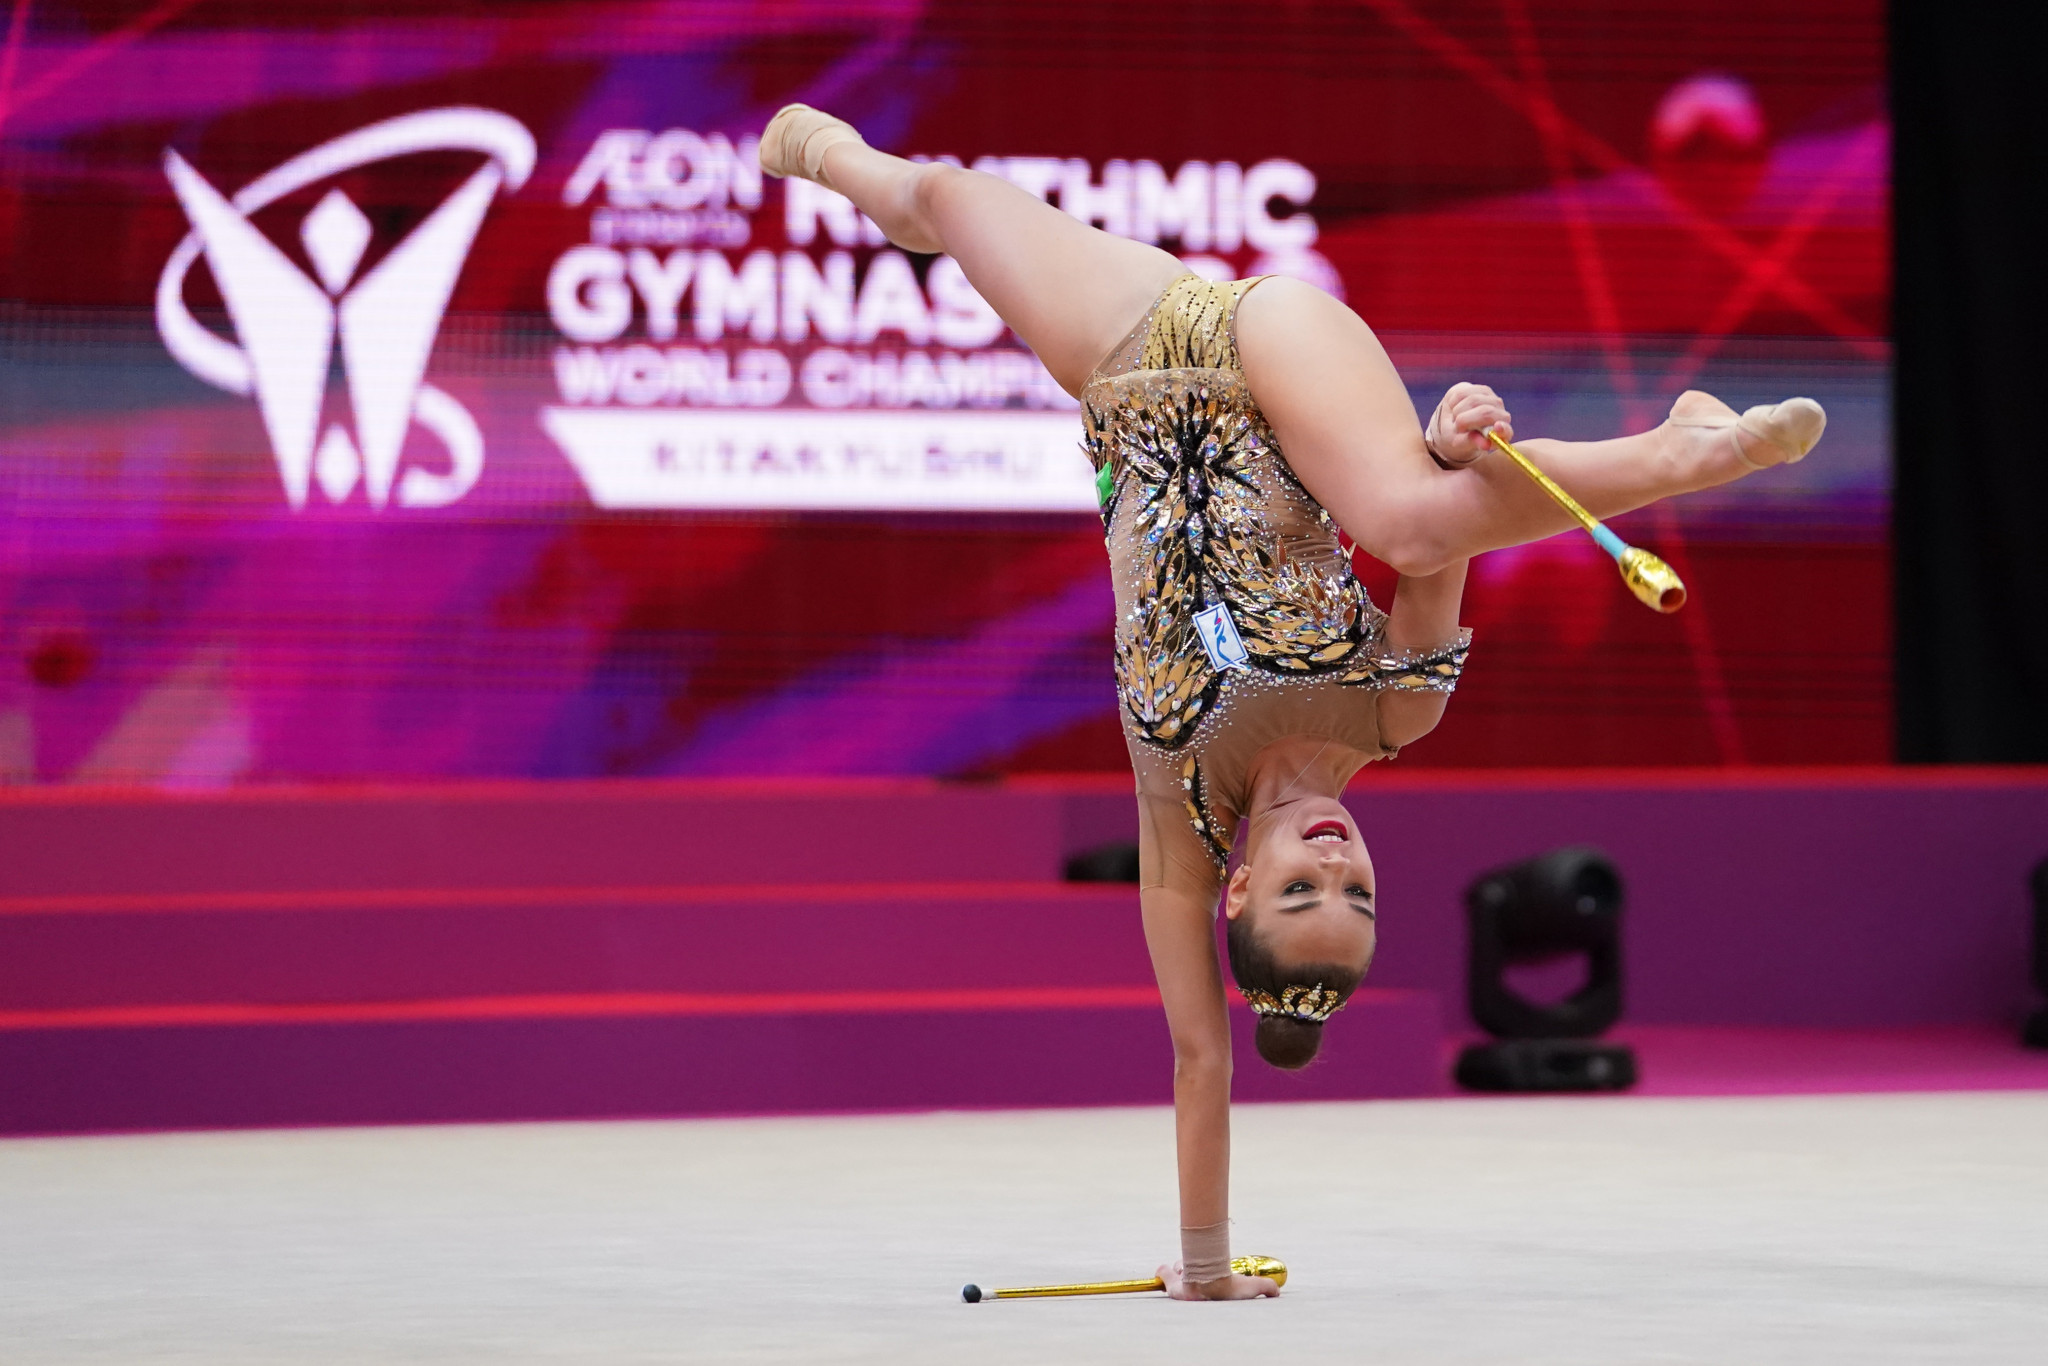 Dina Averina took gold in the individual clubs with a score of 27.100 ©Getty Images